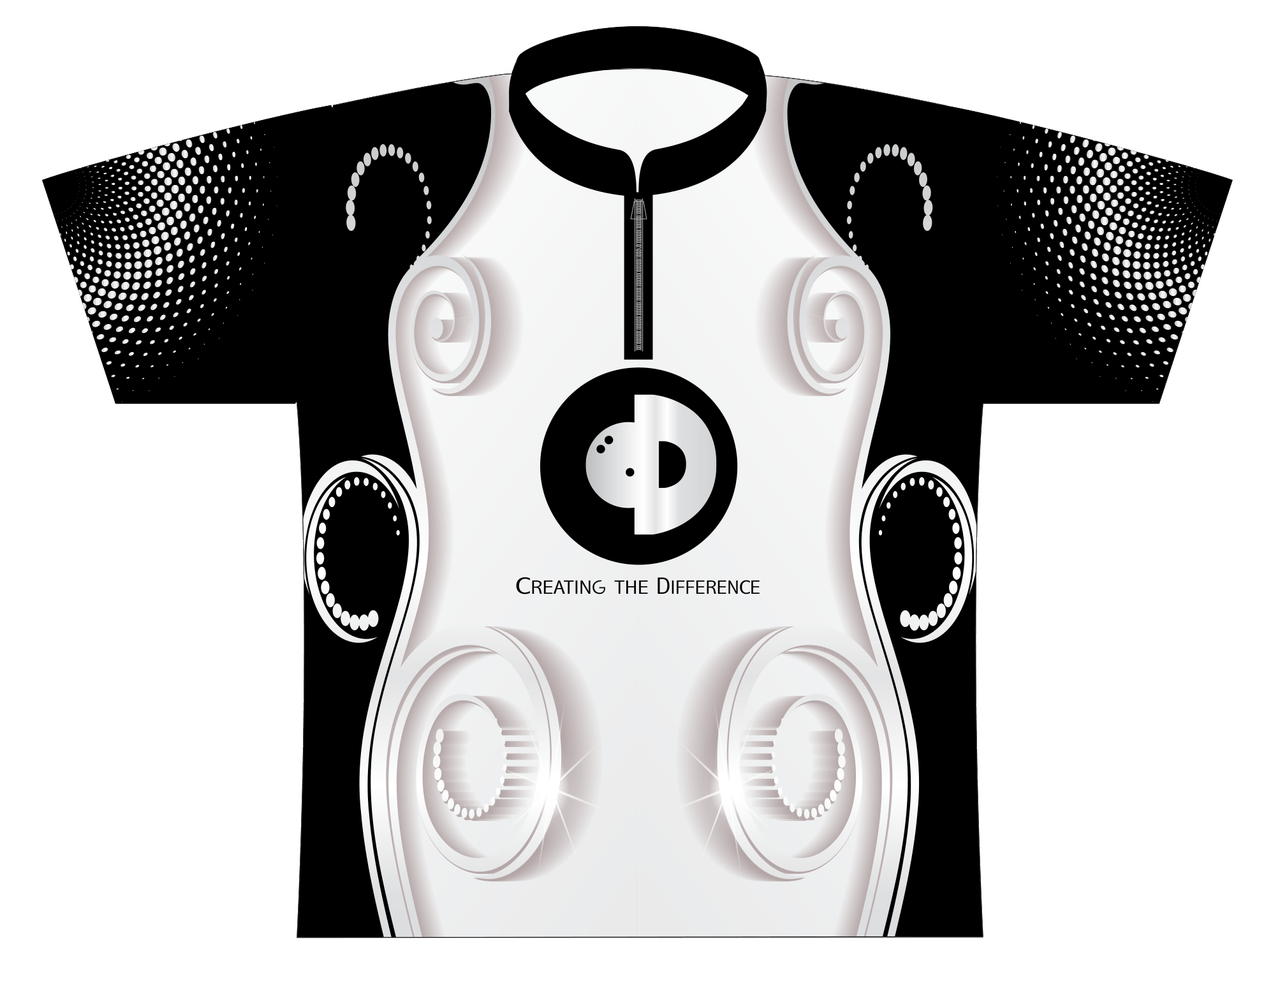 White Swirl Logo - Creating The Difference Black White Swirl Dye Sublimated Jersey